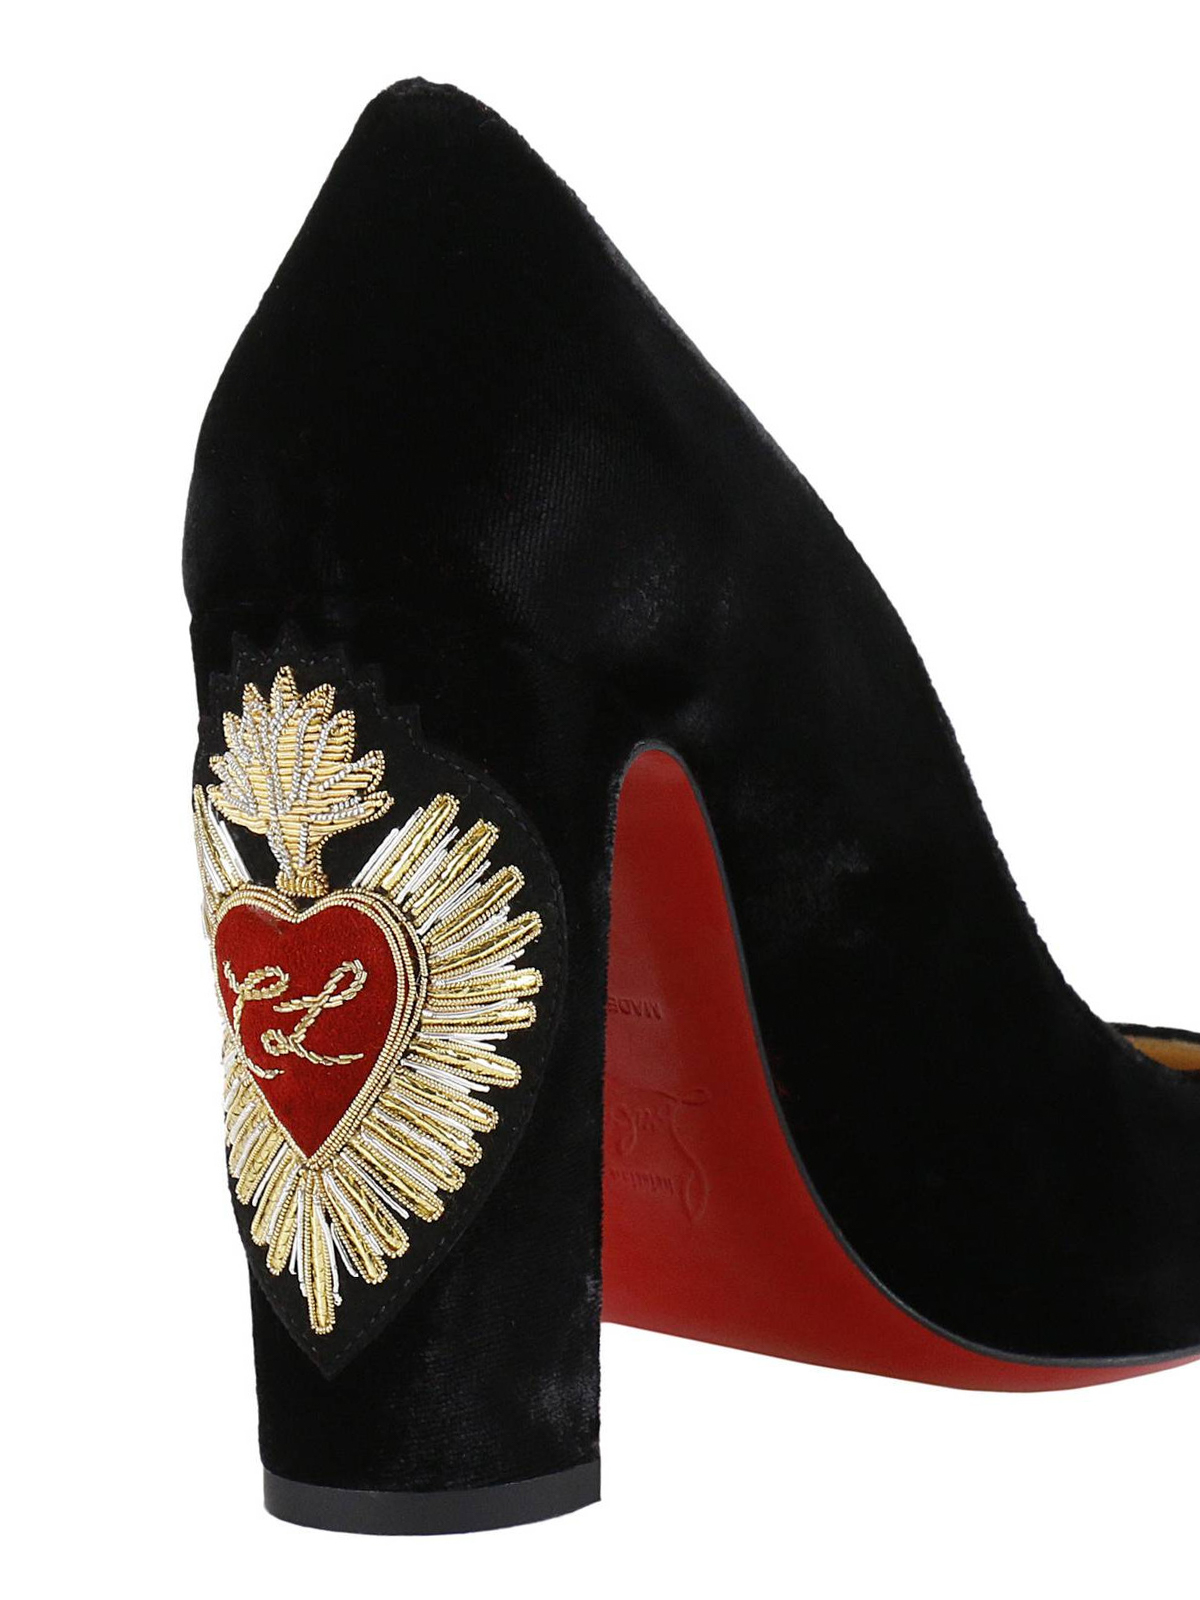 imod mudder Teenageår Court shoes Christian Louboutin - Cadrilla Corazon embroidered shoes -  3170462BK01